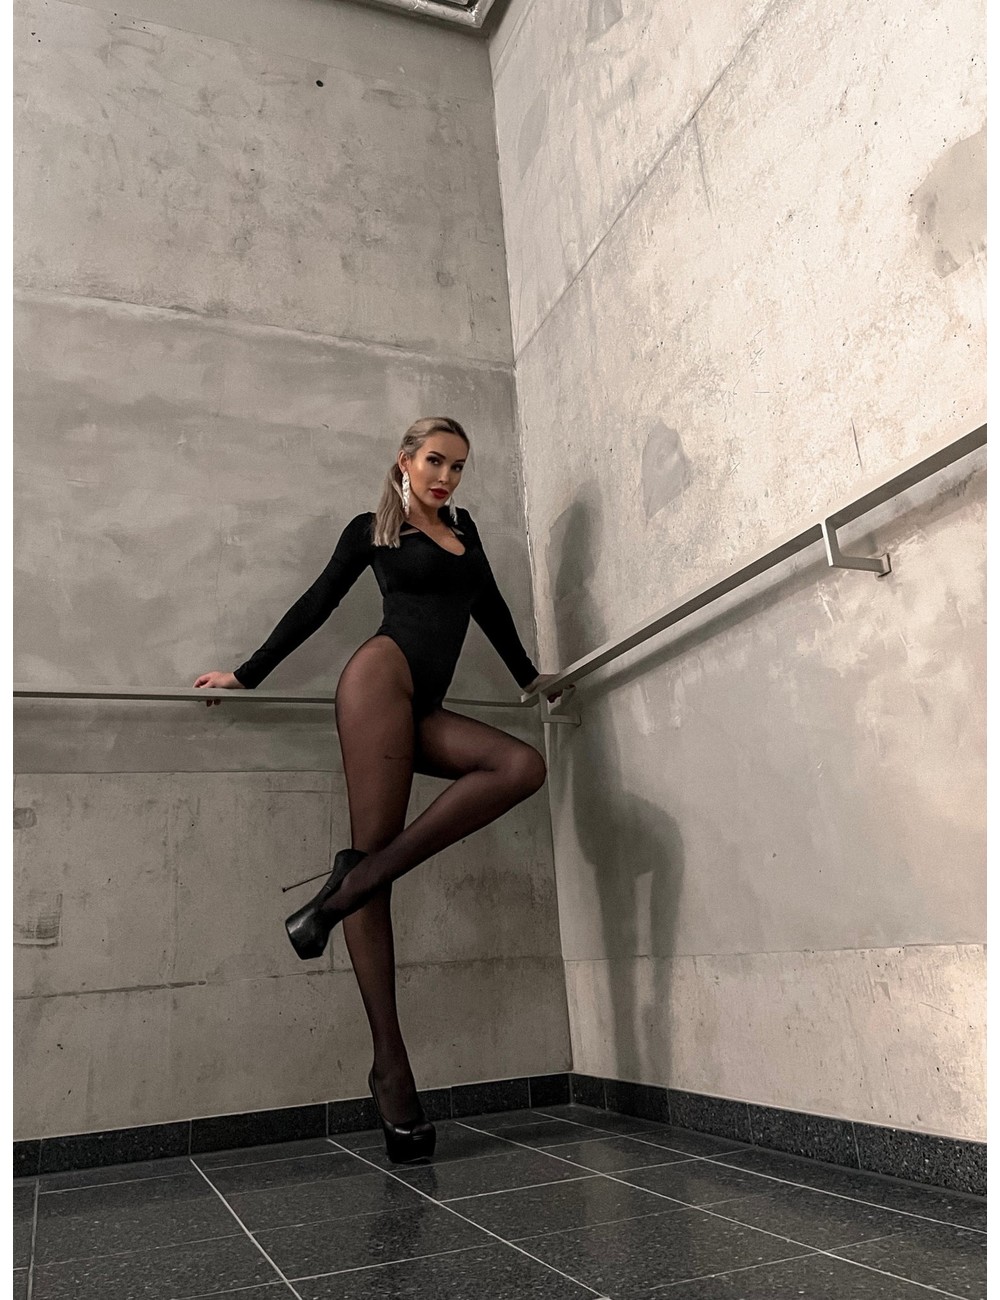 Woman in leotard and heels Stock Photo